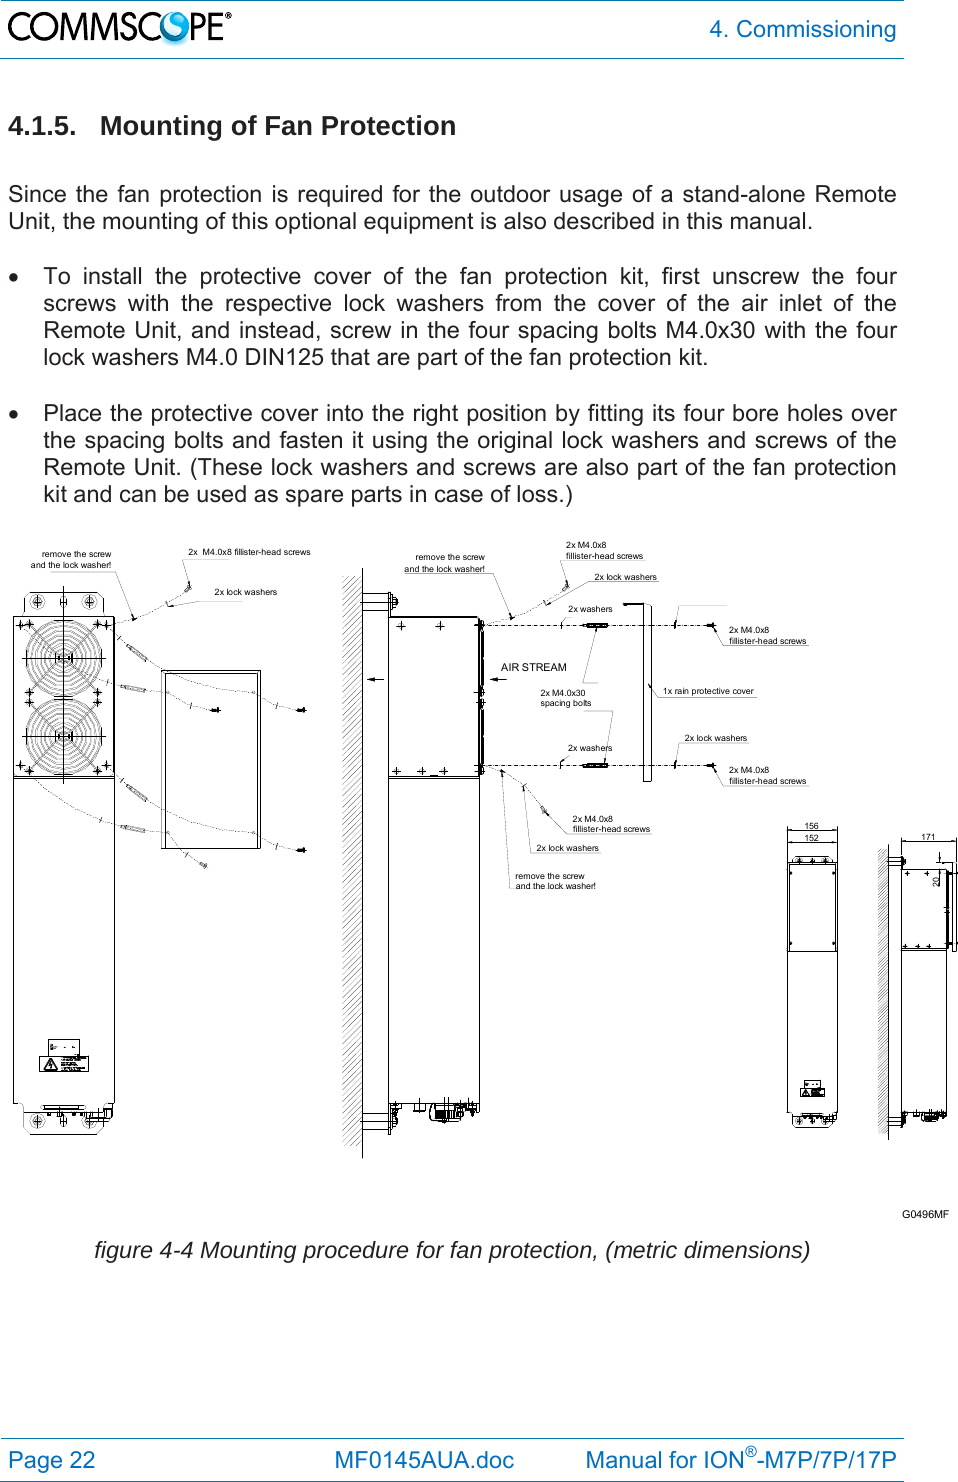  4. Commissioning Page 22              MF0145AUA.doc           Manual for ION®-M7P/7P/17P 4.1.5.  Mounting of Fan Protection  Since the fan protection is required for the outdoor usage of a stand-alone Remote Unit, the mounting of this optional equipment is also described in this manual.    To install the protective cover of the fan protection kit, first unscrew the four screws with the respective lock washers from the cover of the air inlet of the Remote Unit, and instead, screw in the four spacing bolts M4.0x30 with the four lock washers M4.0 DIN125 that are part of the fan protection kit.    Place the protective cover into the right position by fitting its four bore holes over the spacing bolts and fasten it using the original lock washers and screws of the Remote Unit. (These lock washers and screws are also part of the fan protection kit and can be used as spare parts in case of loss.)  2x M4.0x8fillister-head screws2x lock washersremove the screwand the lock washer!2x lock washers2x M4.0x8fillister-head screwsremove the screwand the lock washer!2x M4.0x8fillister-head screws1x rain protective cover2x lock washers2x M4.0x8fillister-head screws2x  M4.0x8 fillister-head screws2x lock washersremove the screwand the lock washer!2x washers2x washers156152 17120AIR STREAM2x M4.0x30spacing boltsG0496MF  figure 4-4 Mounting procedure for fan protection, (metric dimensions)  